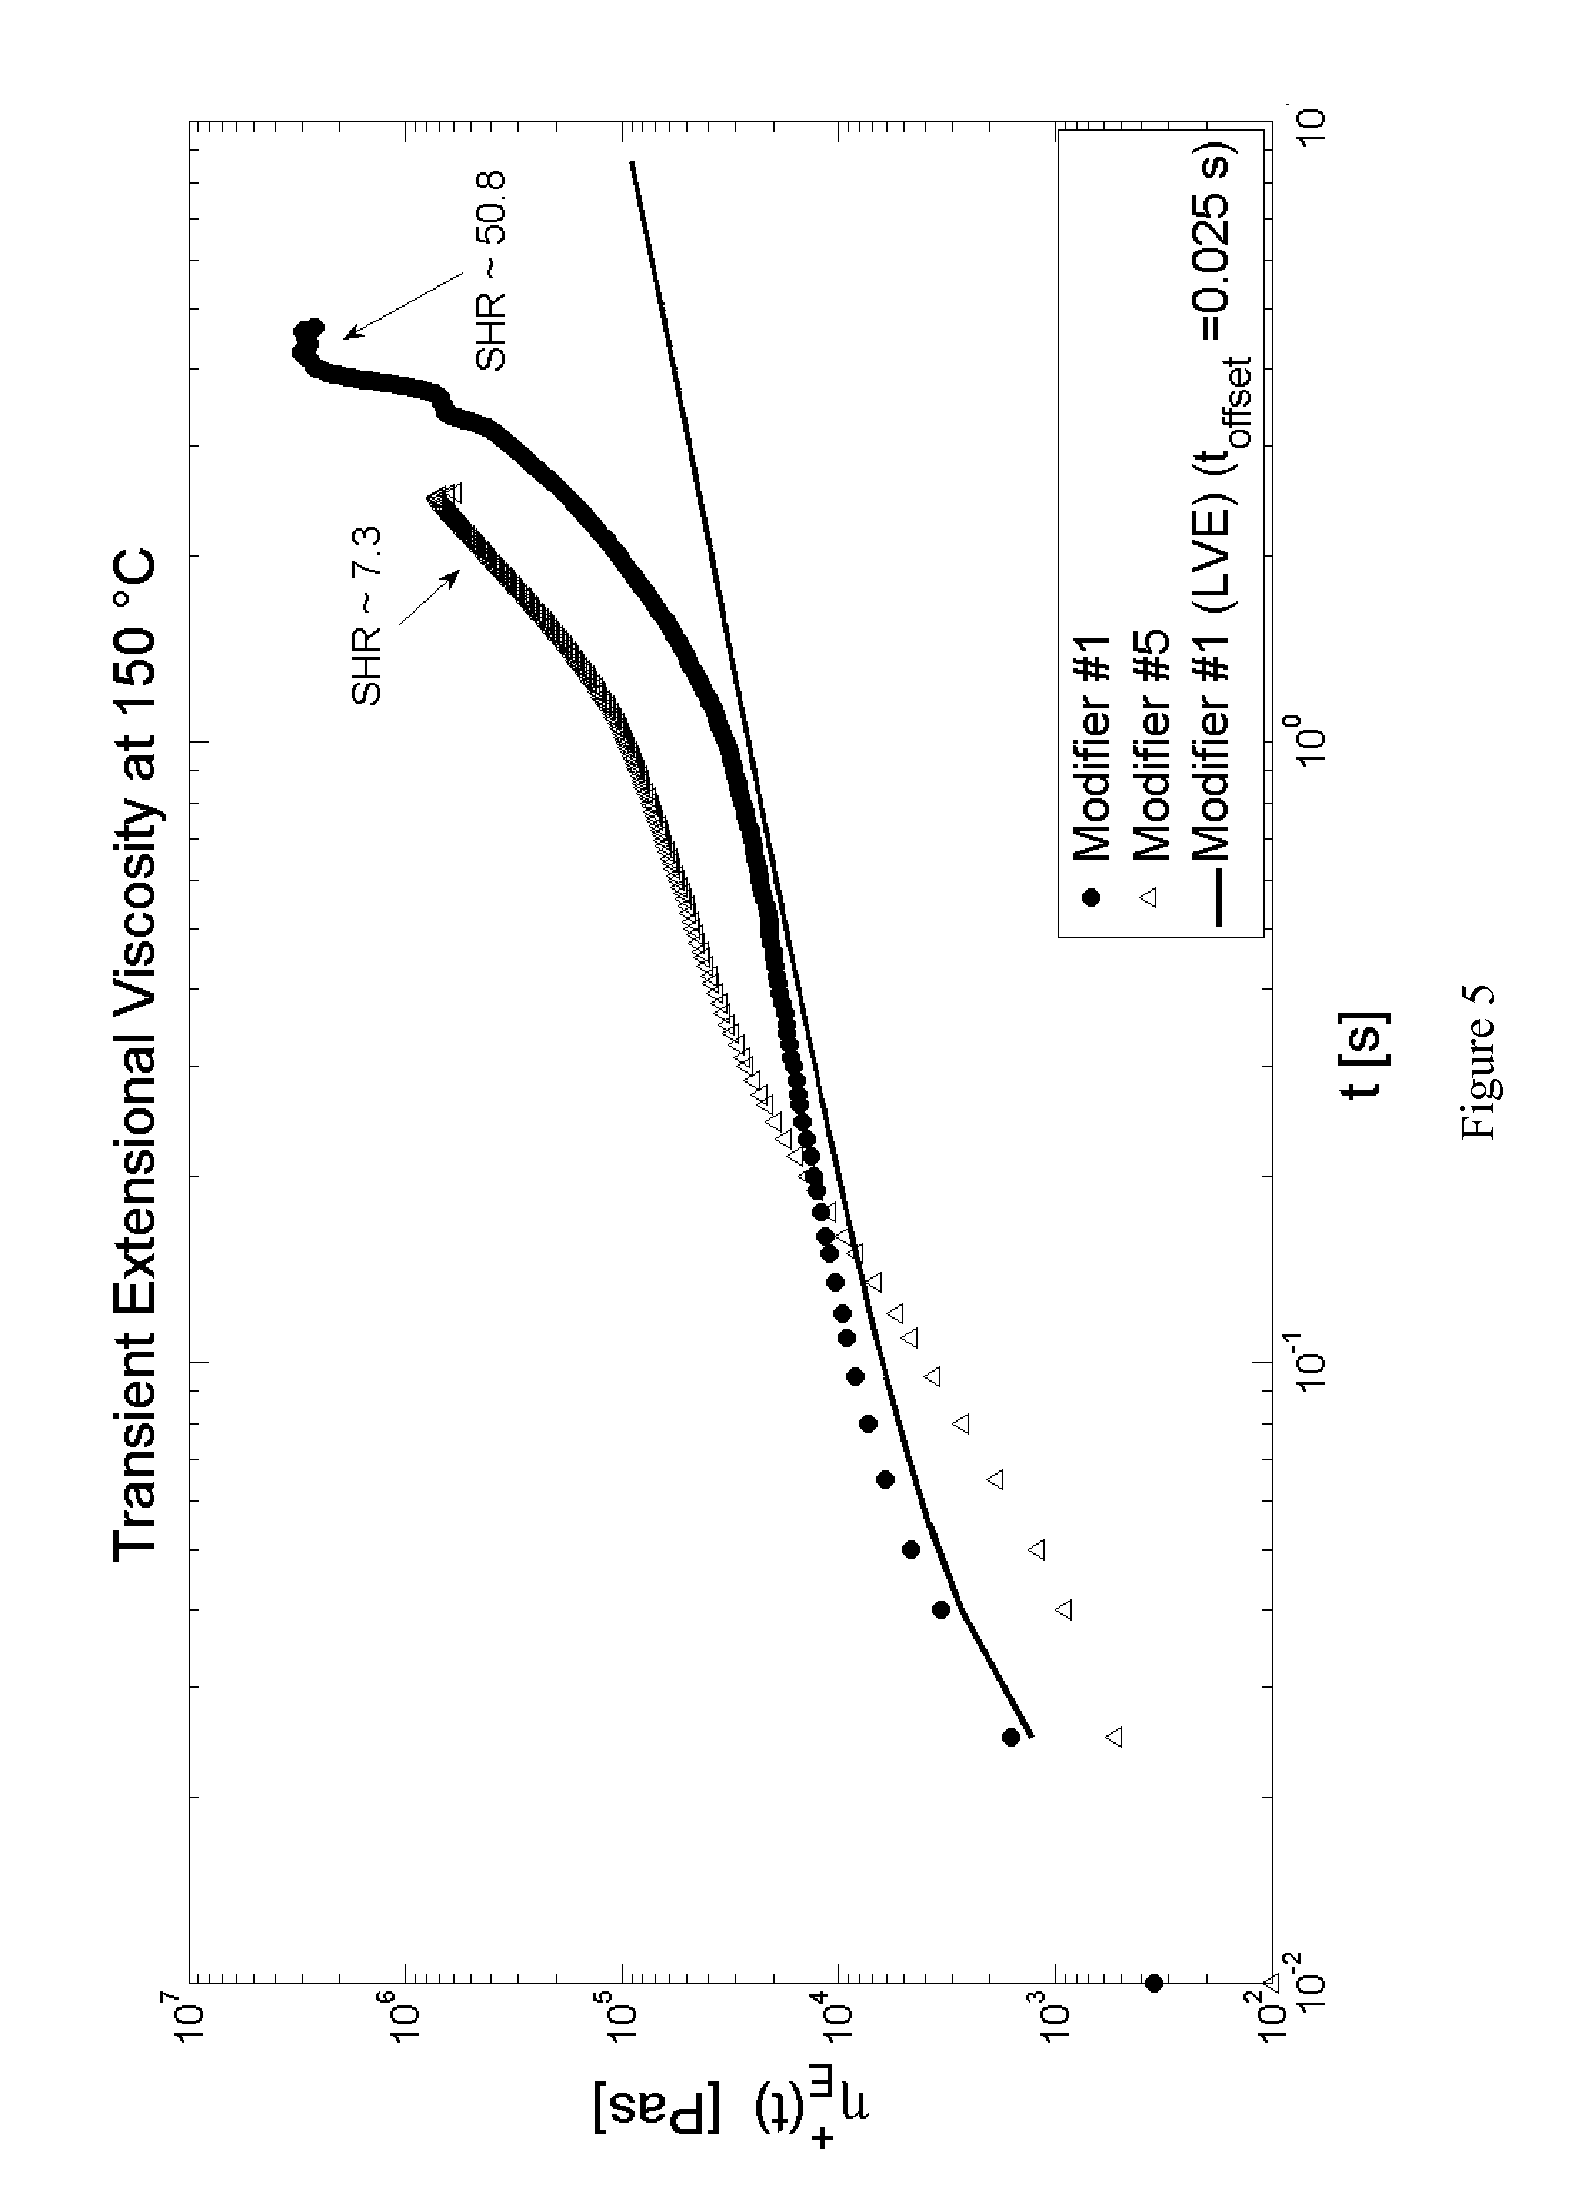 Modified Polyethylene Compositions